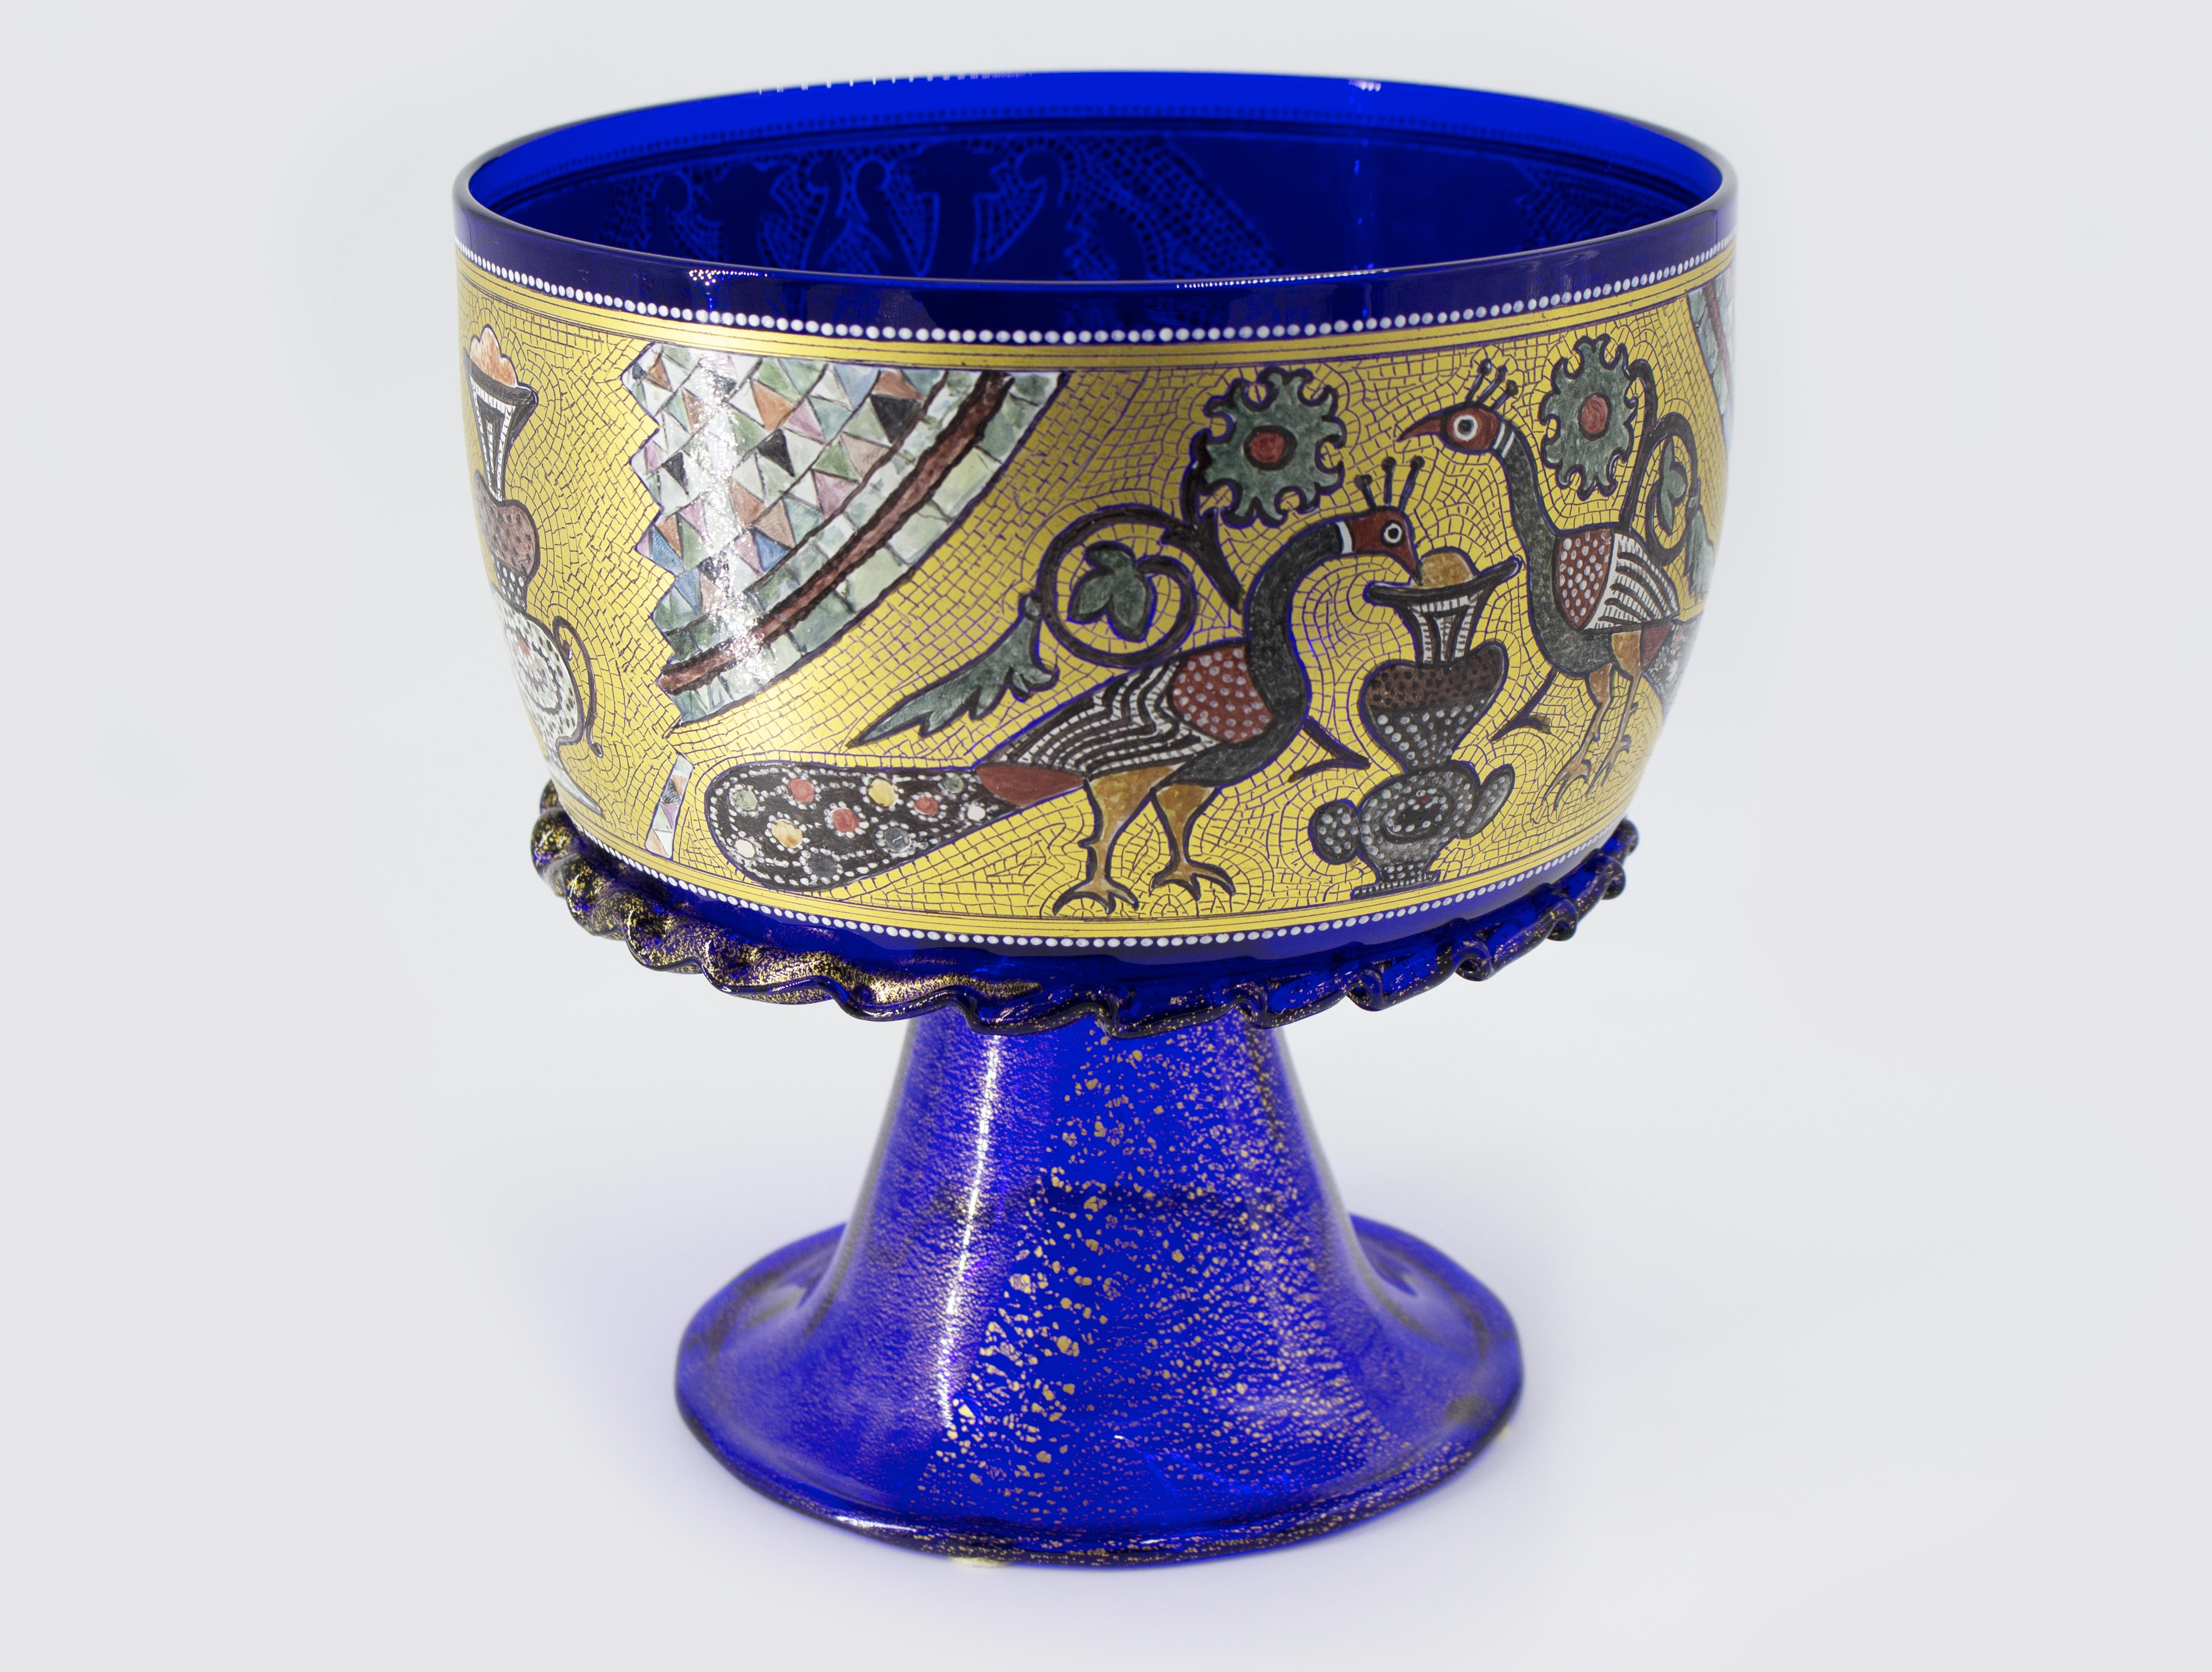 Officine di Murano 1295 Handmade Glass Cup Hand Decored 24kt Gold Leaf & Enamel For Sale 2